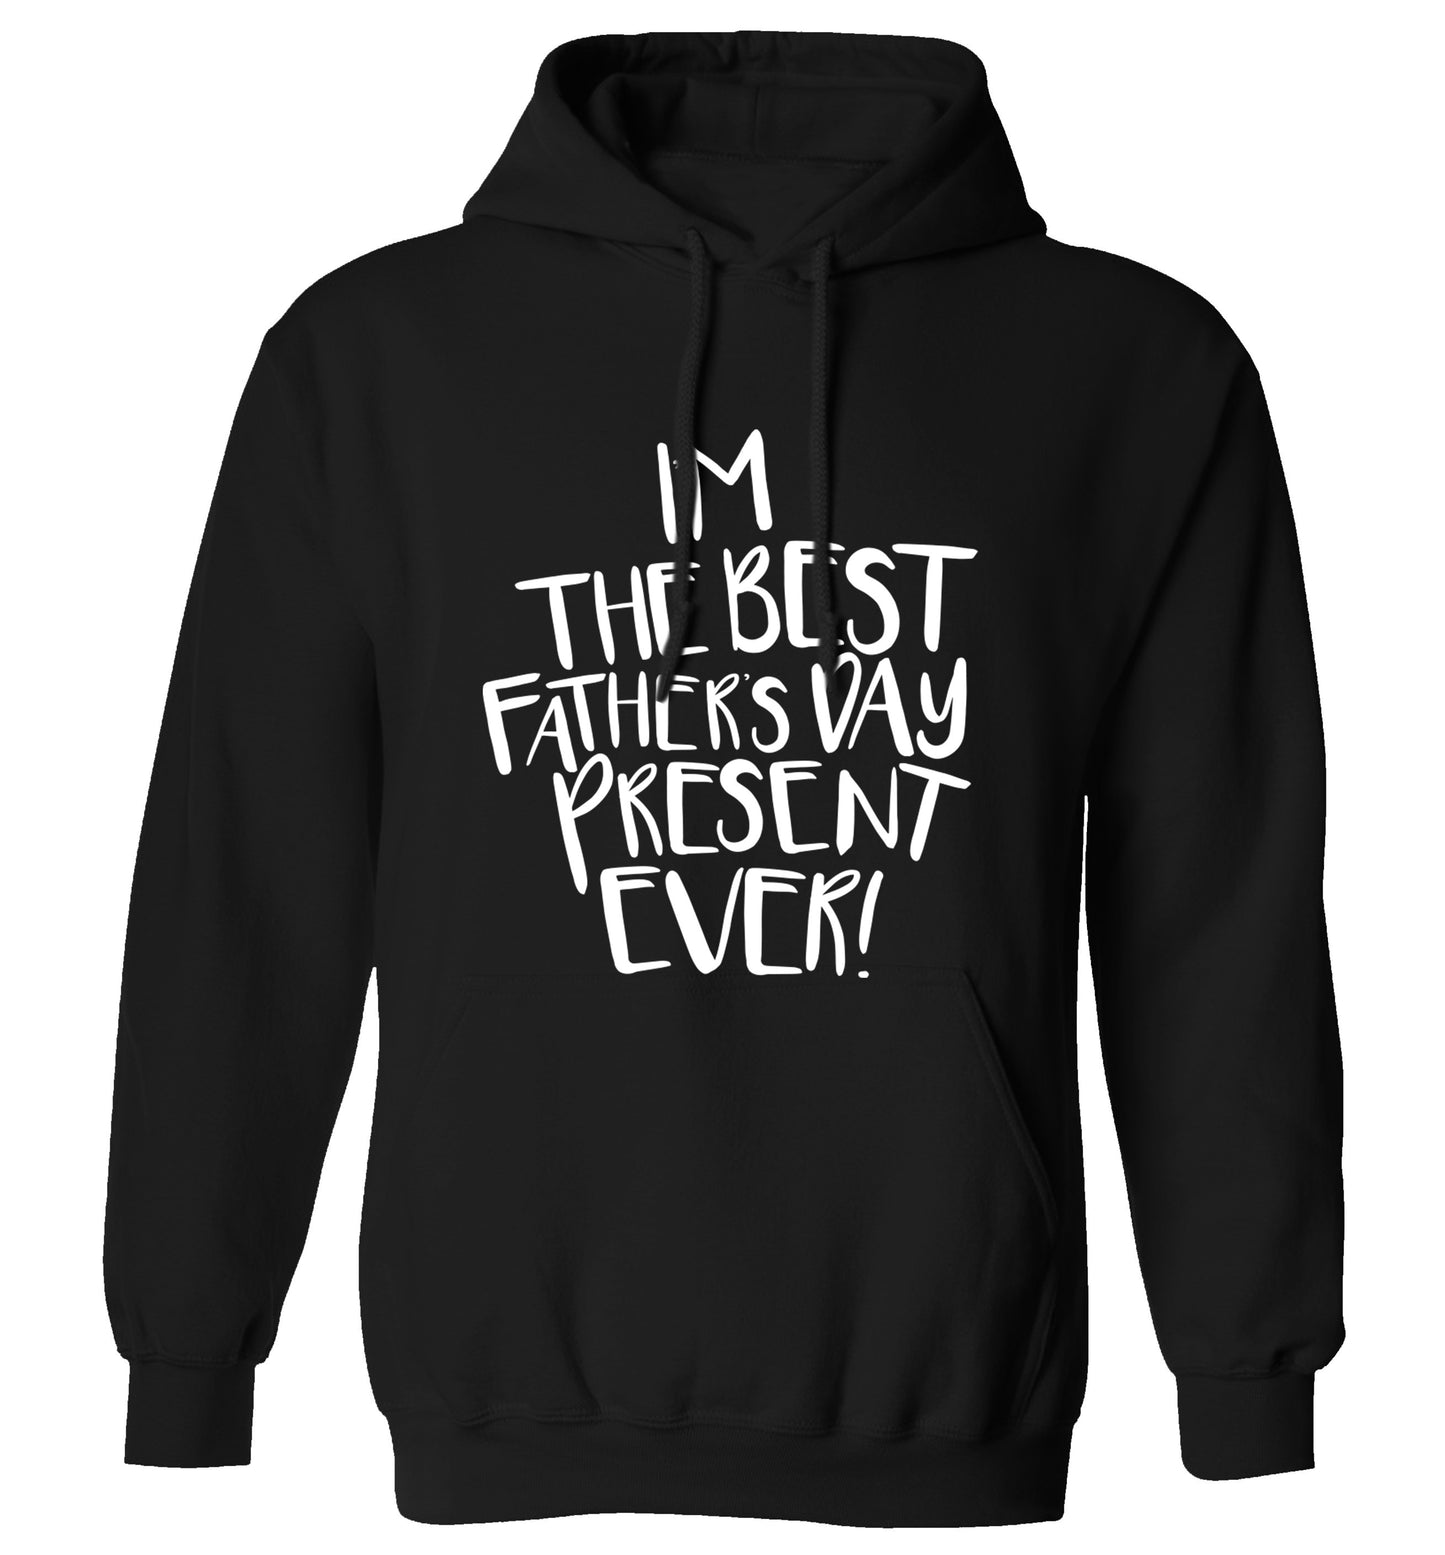 I'm the best father's day present ever! adults unisex black hoodie 2XL